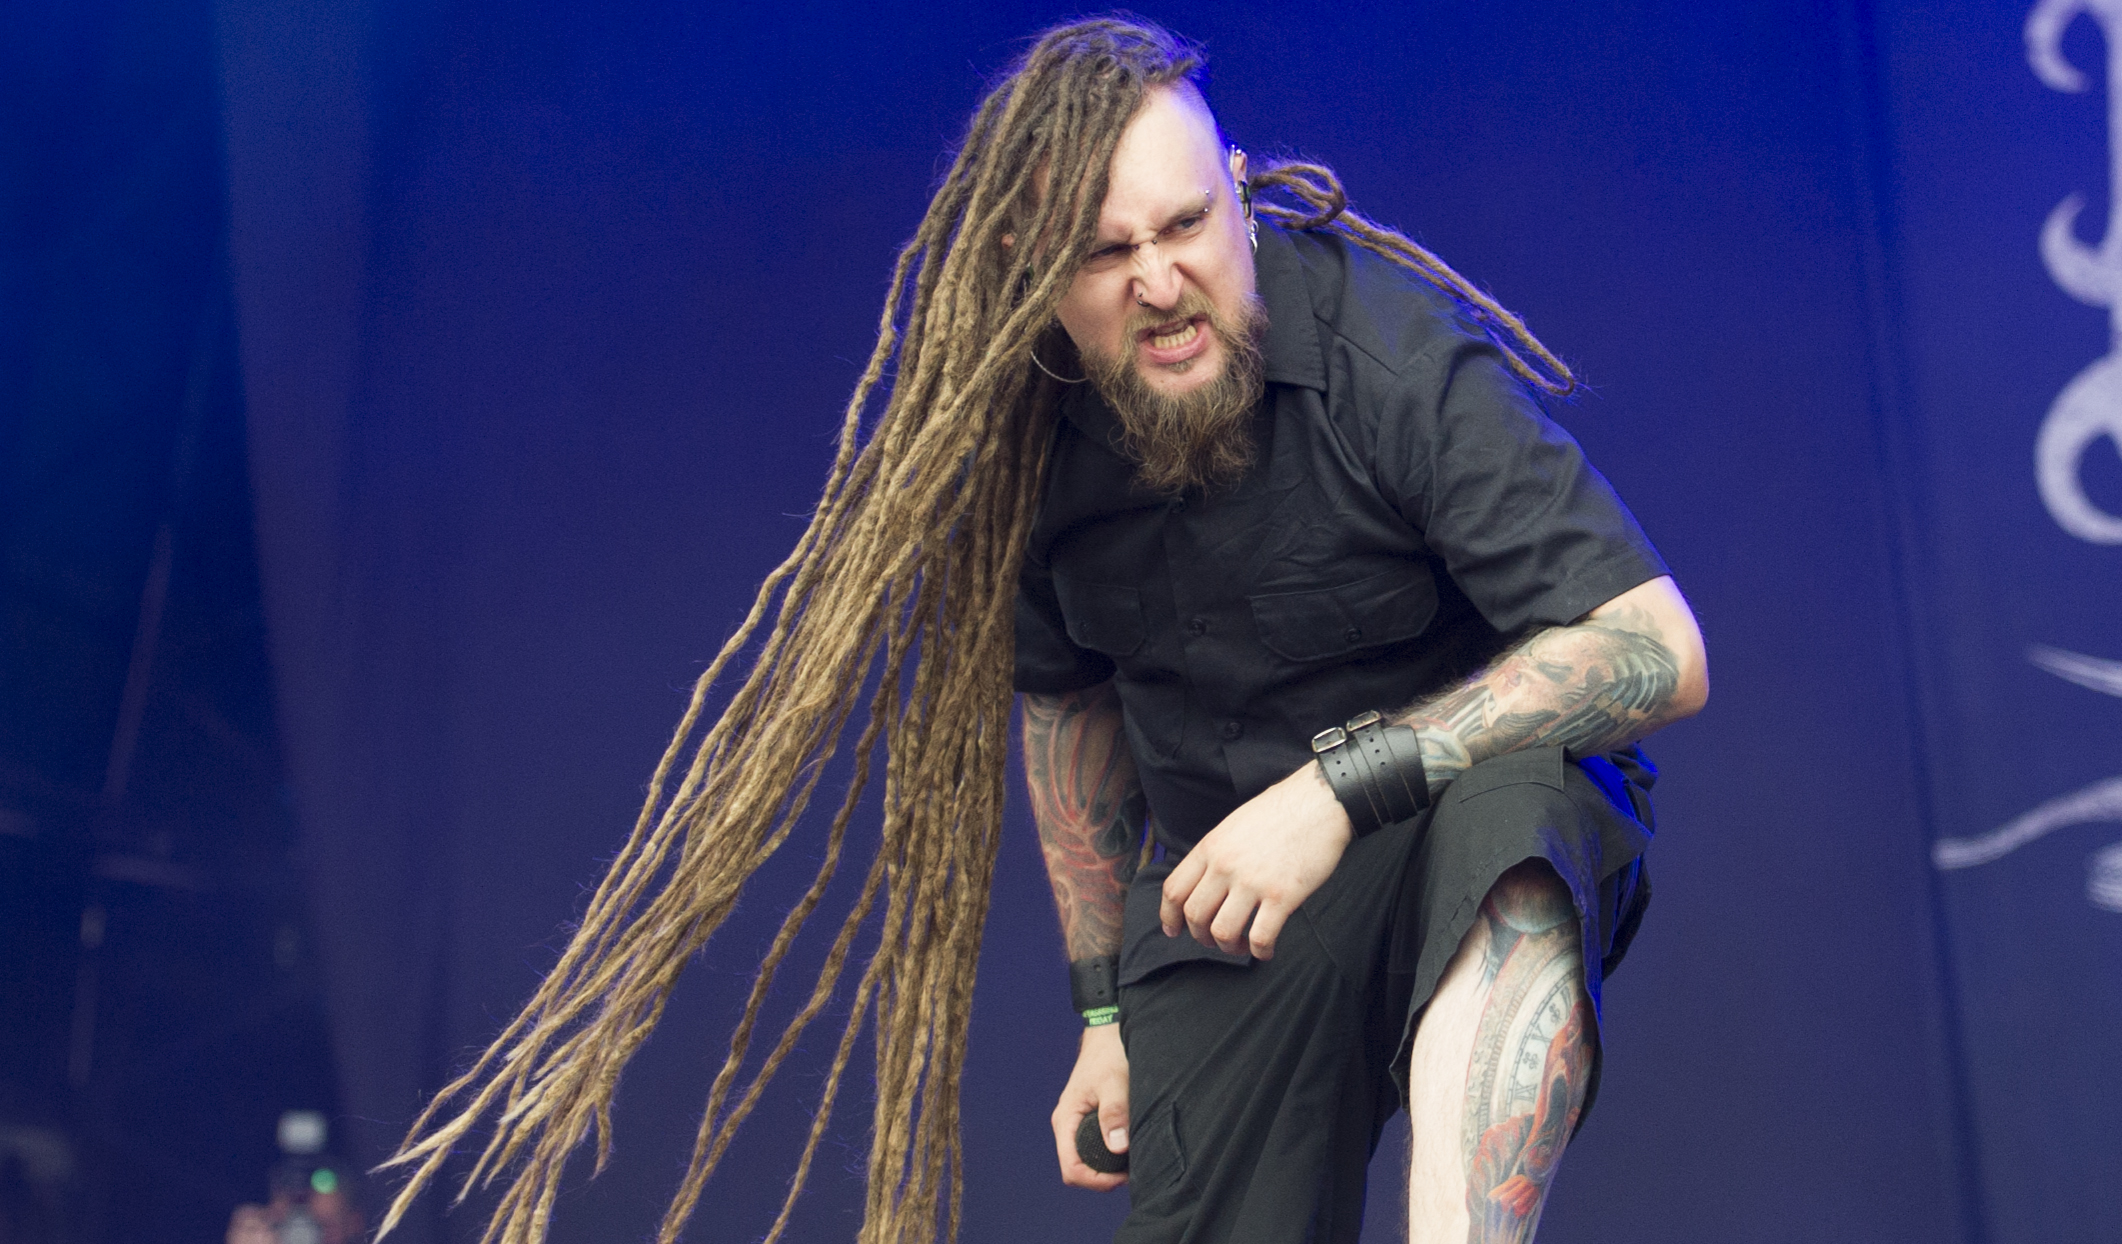 Members of Polish Metal Band Decapitated Charged with Rape and Kidnapping